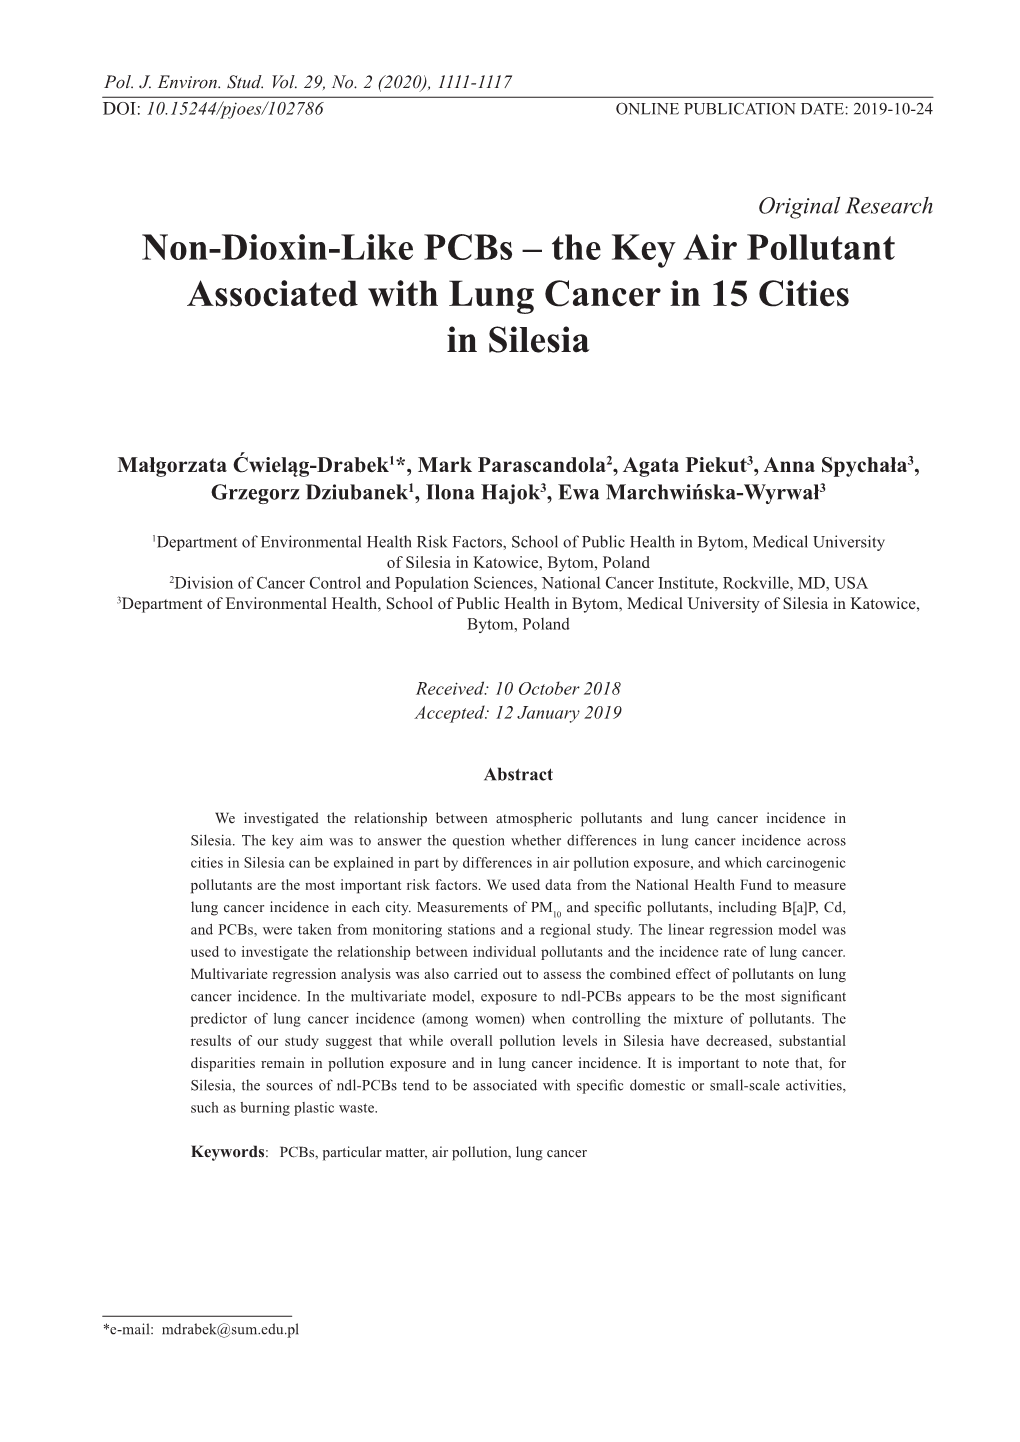 Non-Dioxin-Like Pcbs – the Key Air Pollutant Associated with Lung Cancer in 15 Cities in Silesia